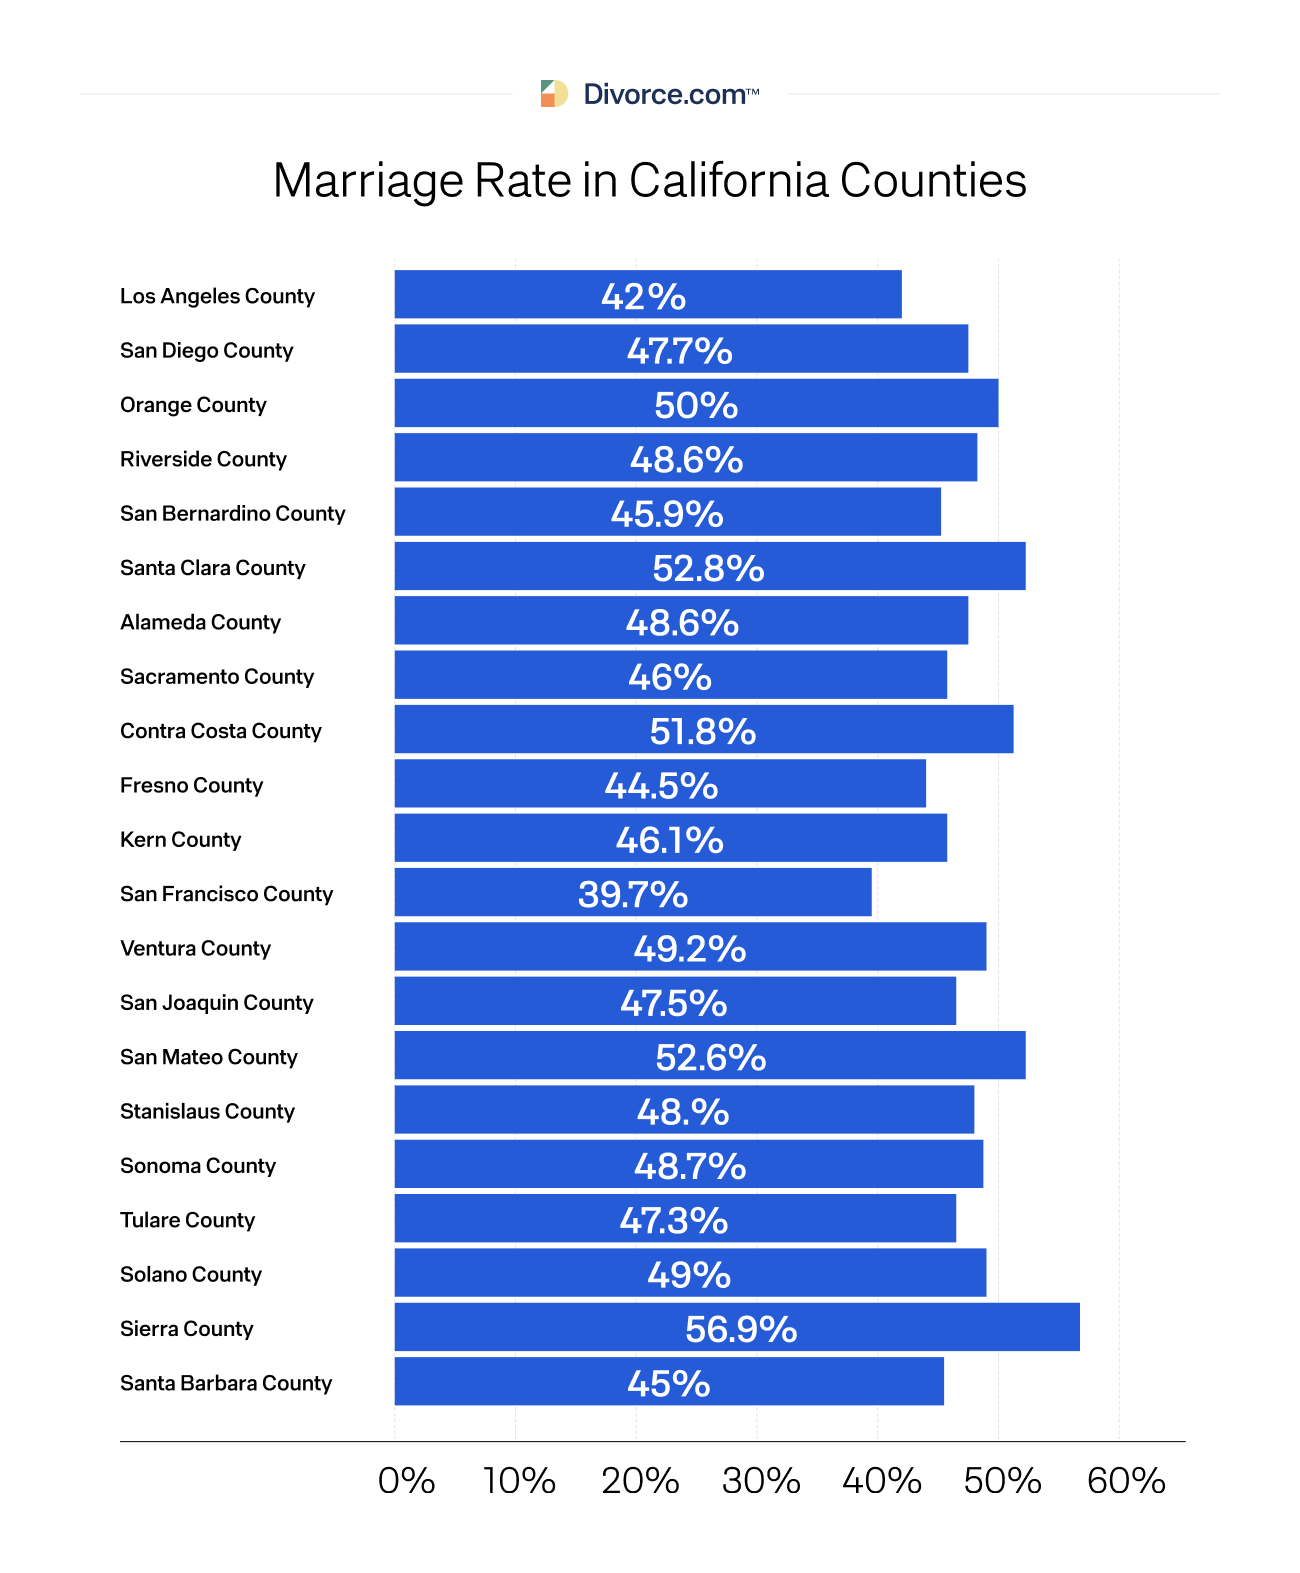 Marriage Rate in California Counties